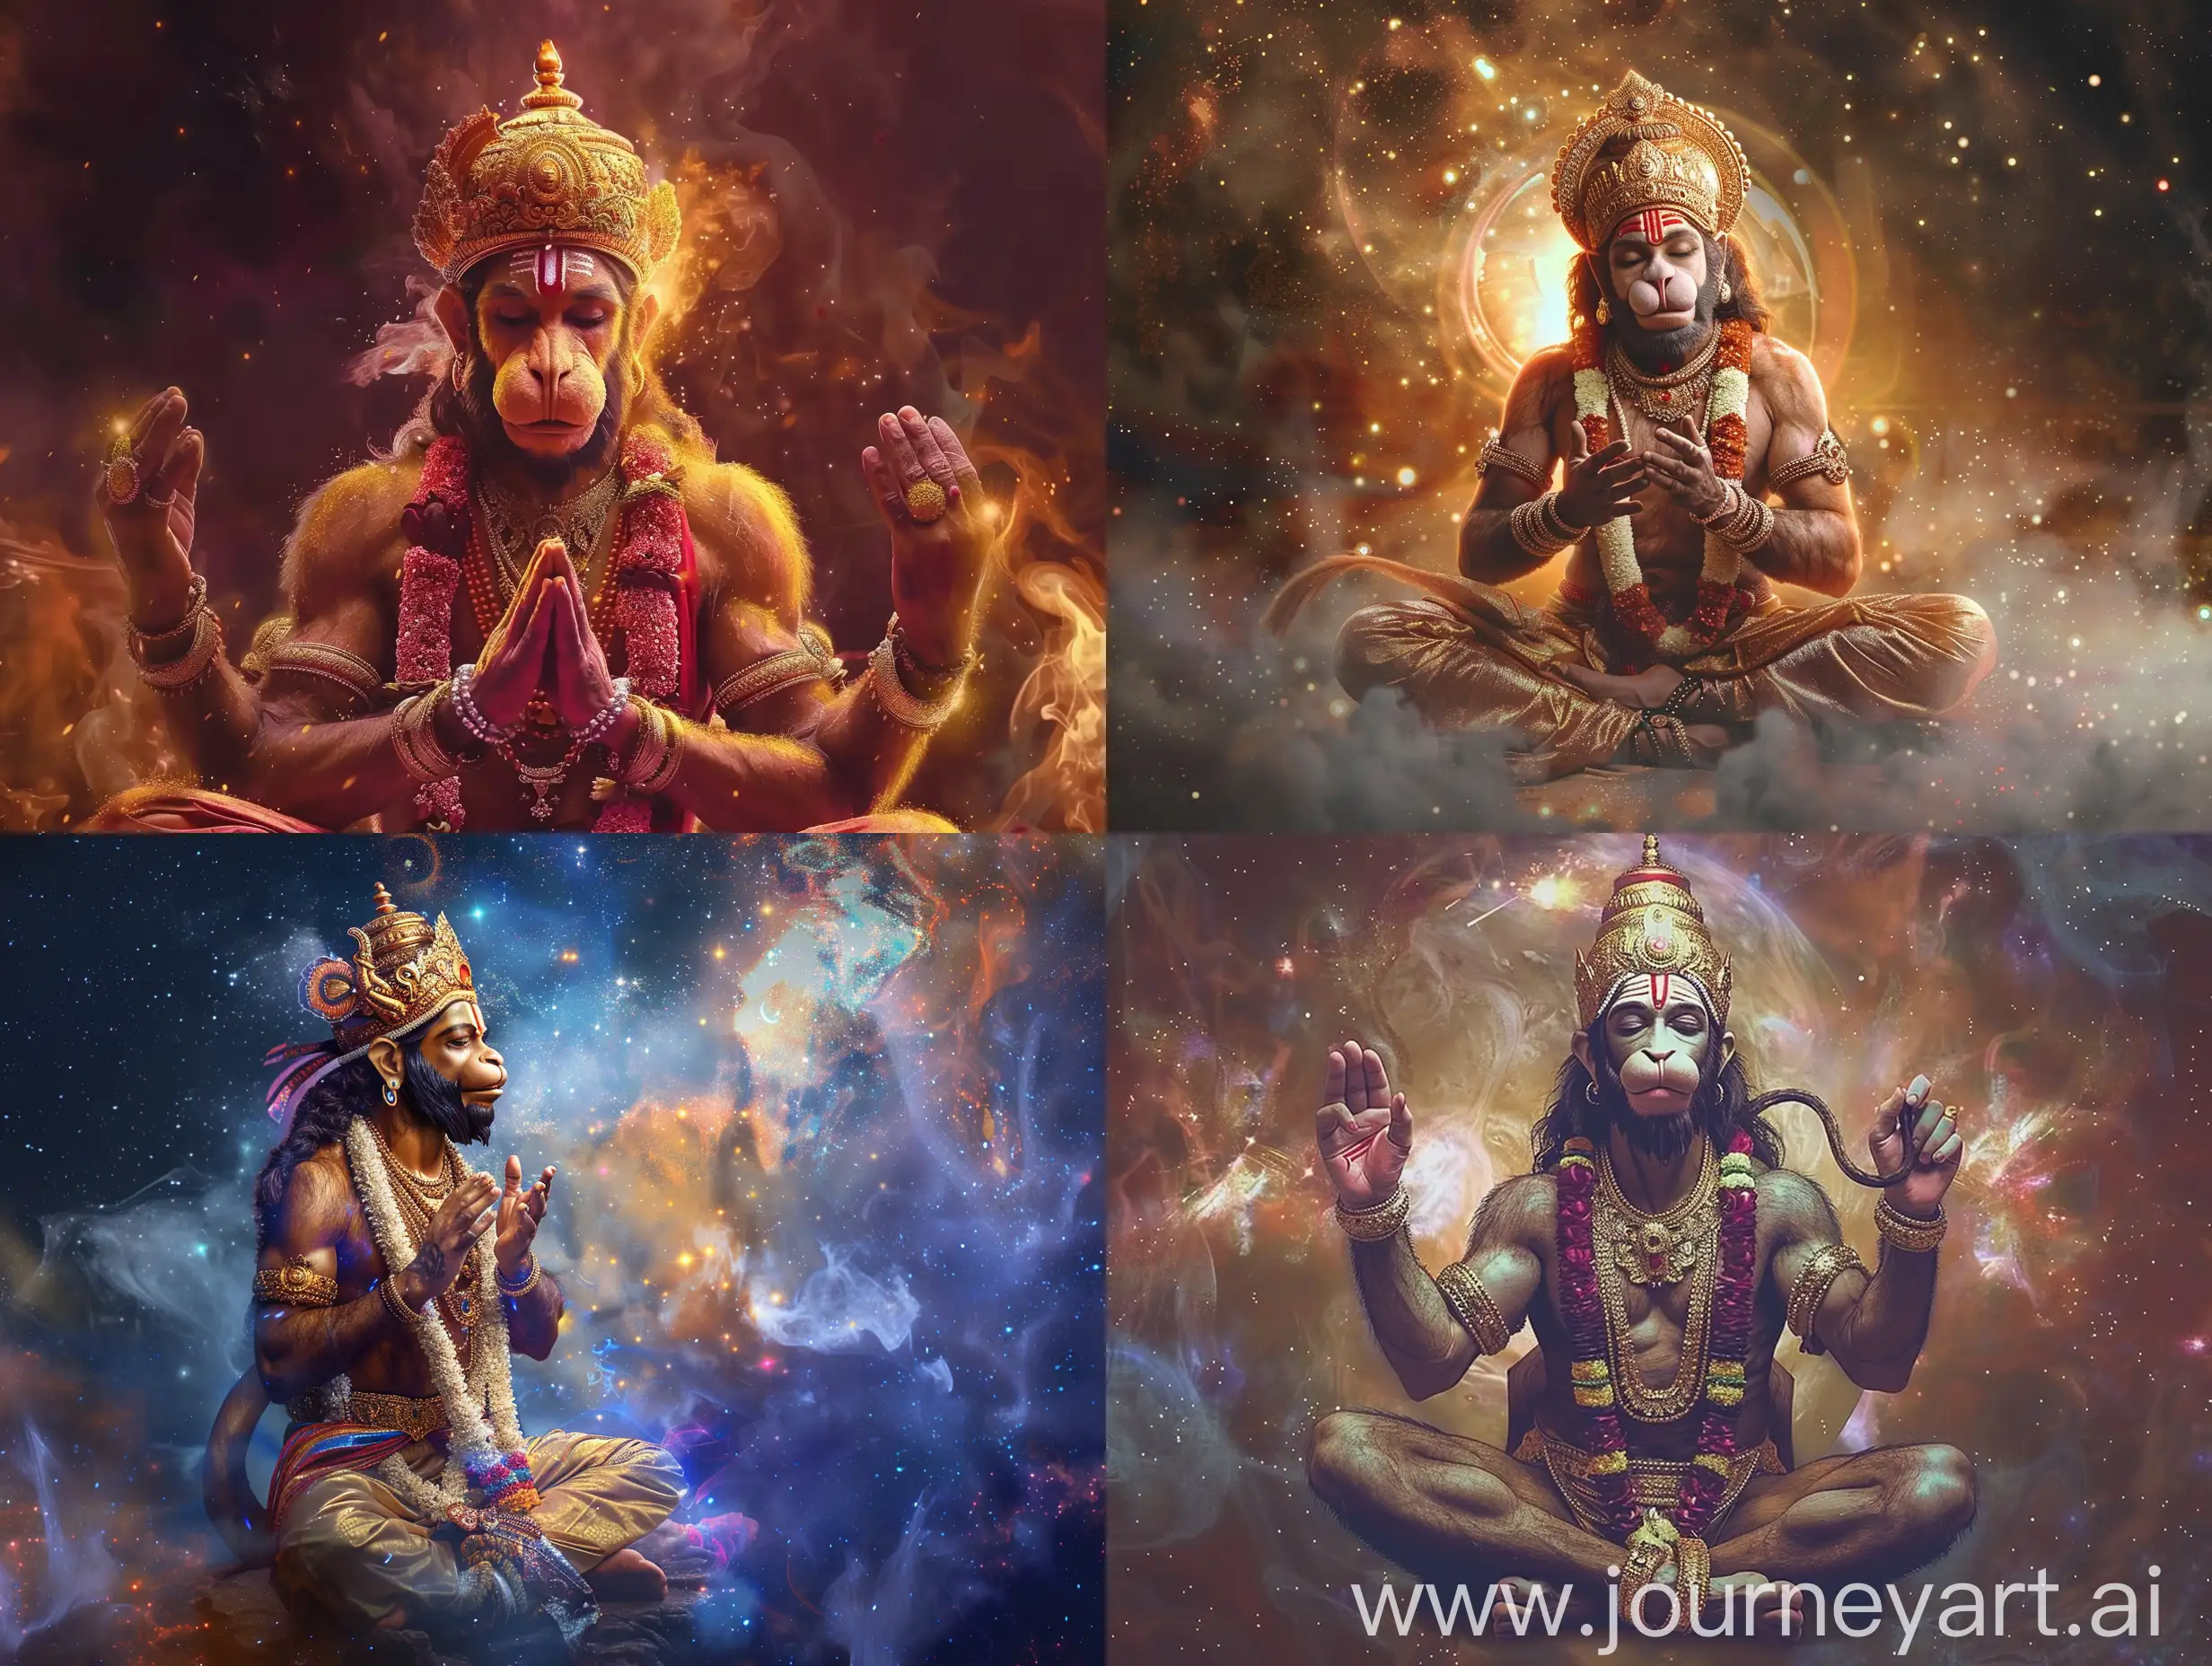 Majestic image of Lord Hanuman in different realm of realities chanting Ram, realistic , cosmic